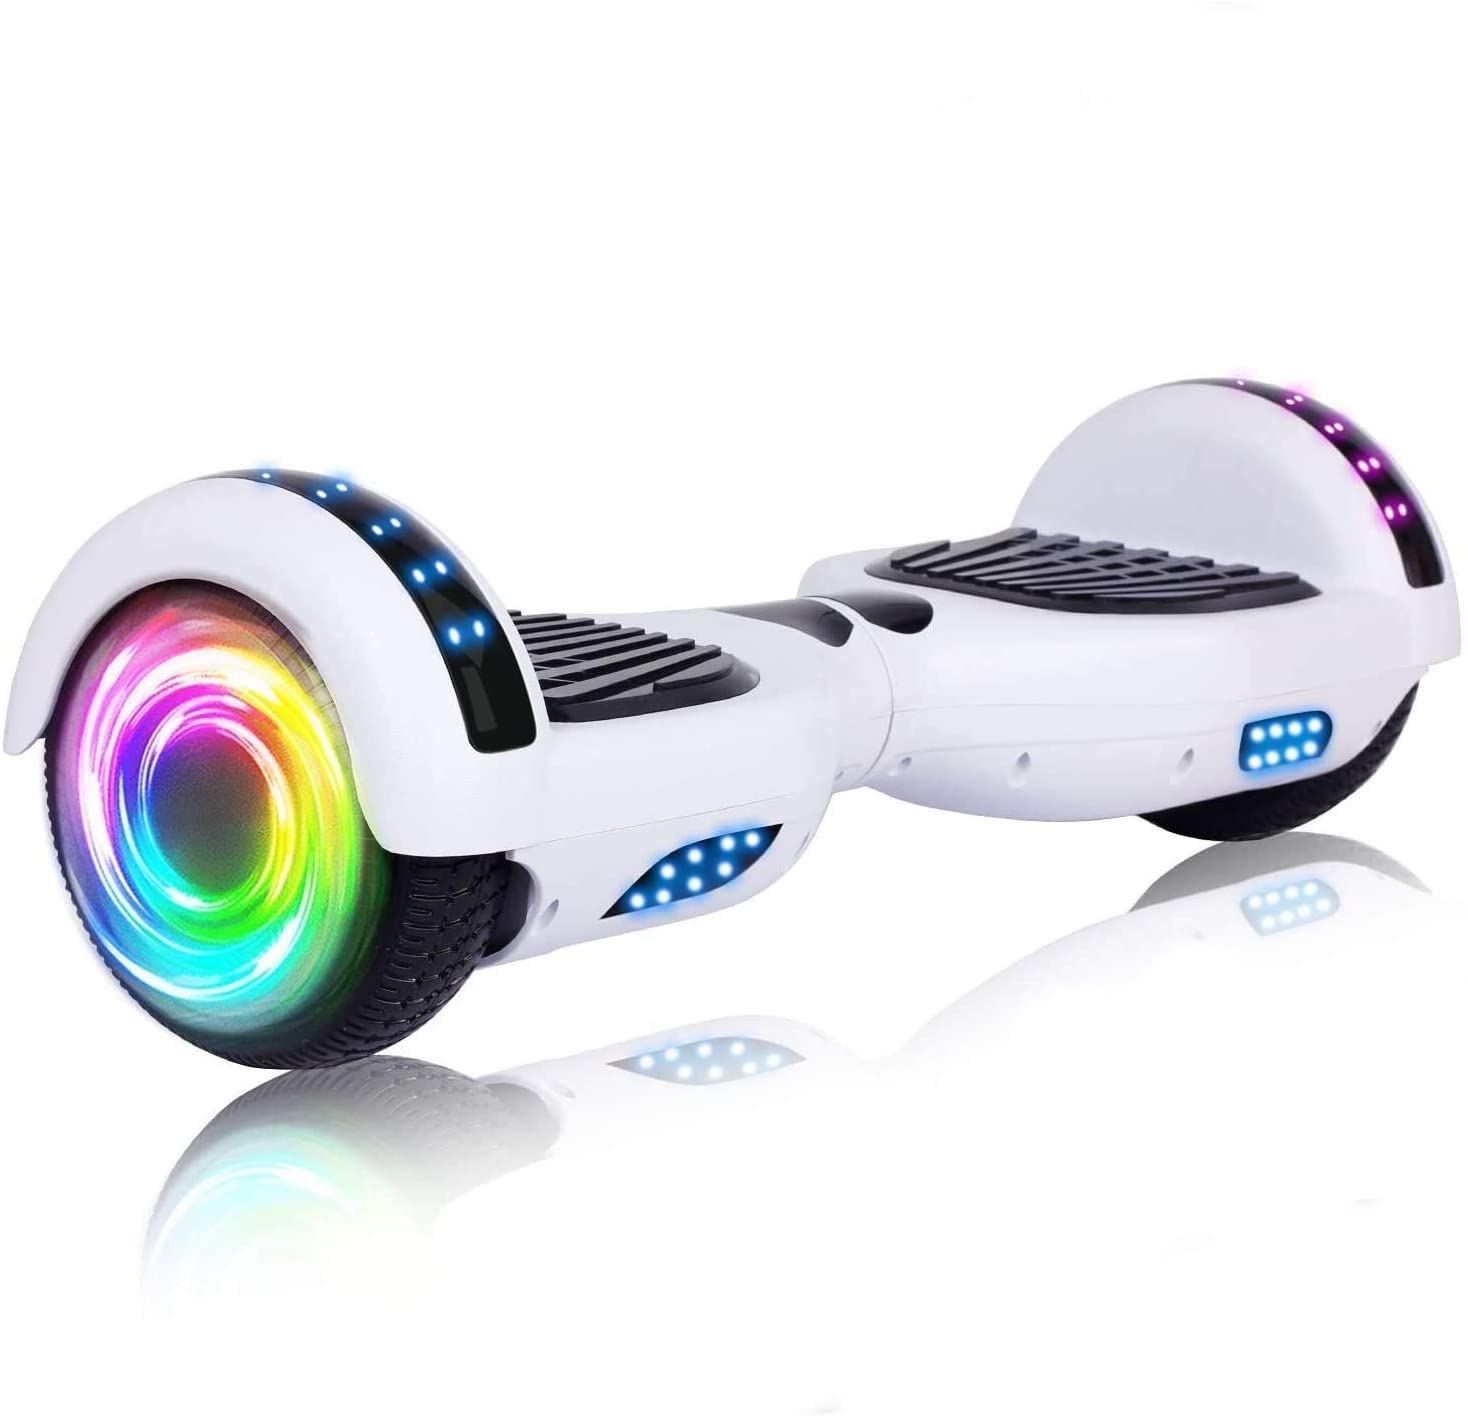 Hoverboard, UL2272 Certified, with Bluetooth and Colorful Lights Self Balancing Scooter - White